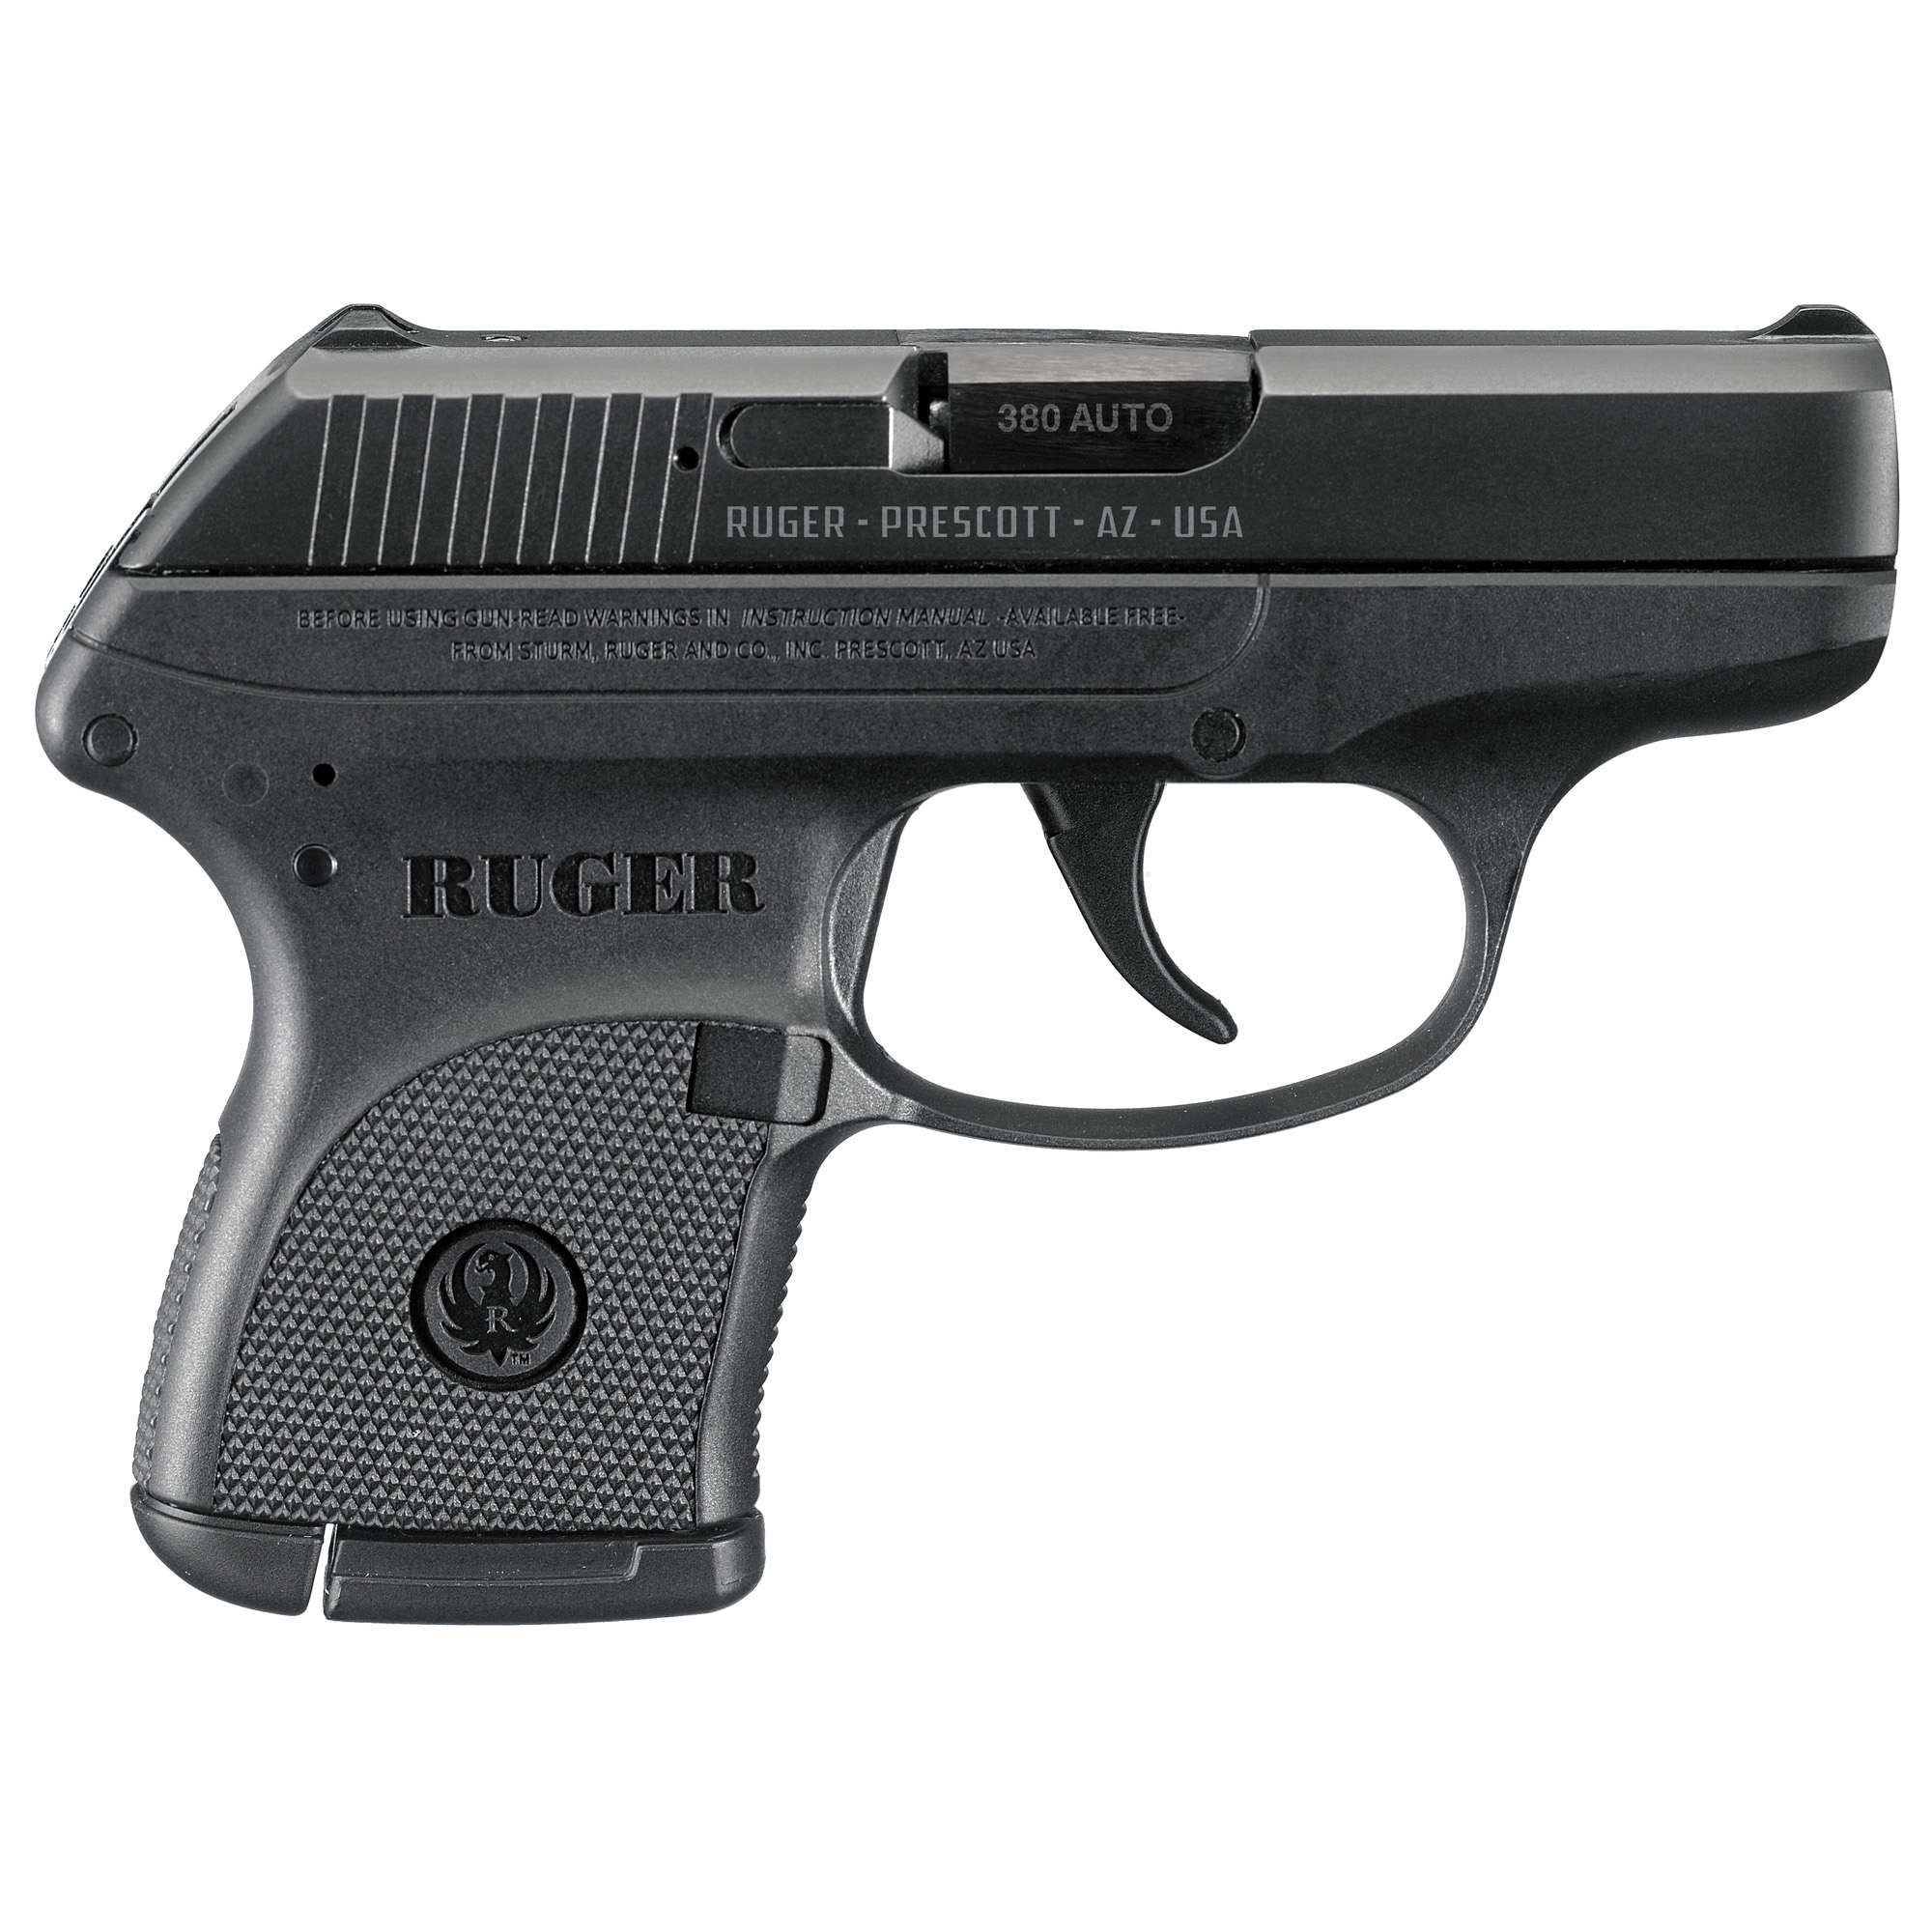 Ruger, LCP, Double Action Only, Semi-automatic, Polymer Frame Pistol, Sub-Compact, 380 ACP, 2.75" Barrel, Blued Finish, Integral Fixed Sights, 6 Rounds, 1 Magazine